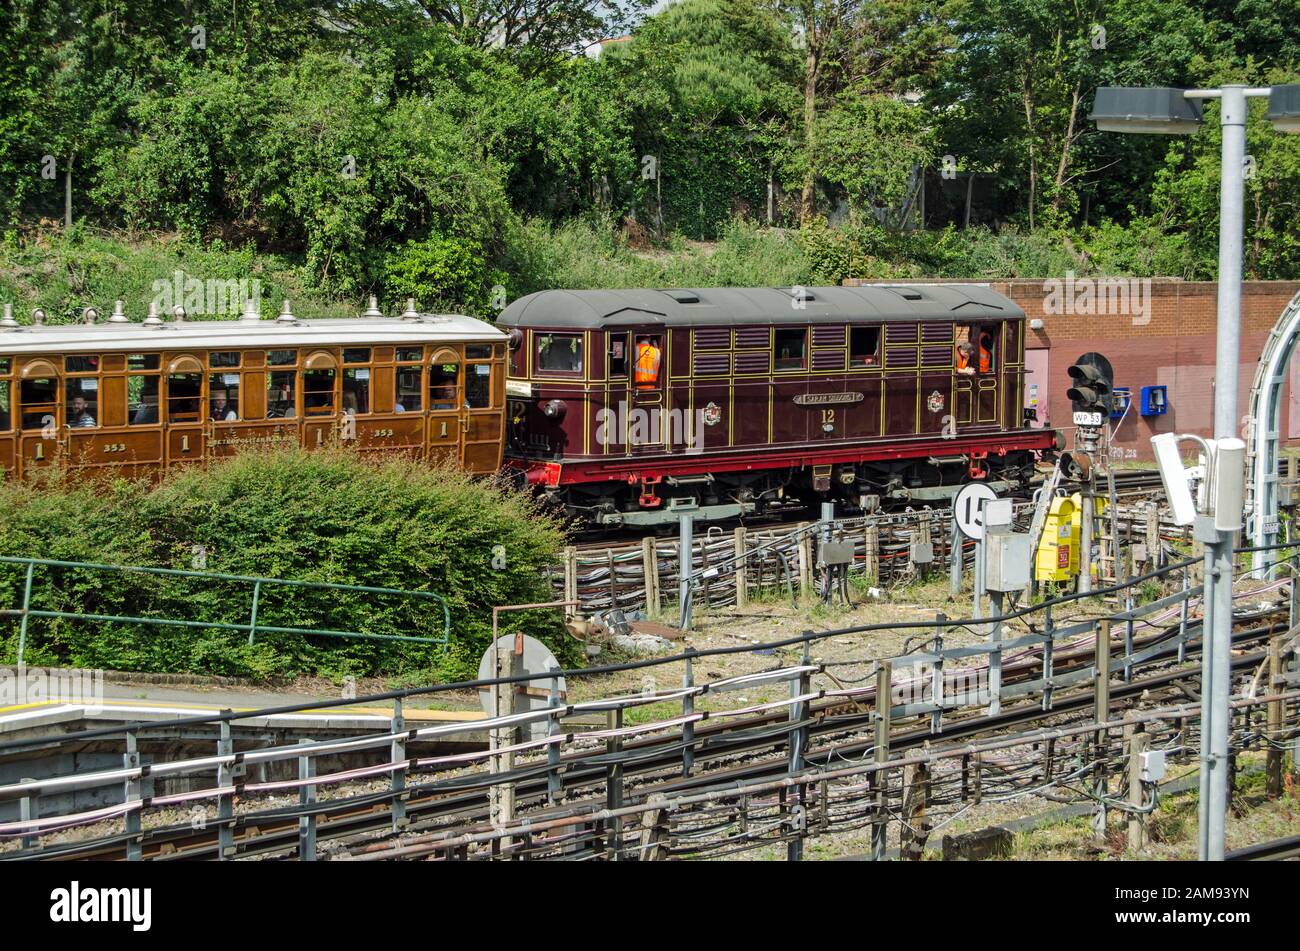 London, UK - June 22, 2019:  Historic Sarah Siddons train engine pulling a series of heritage carriages to mark the 150th anniversary of the District Stock Photo